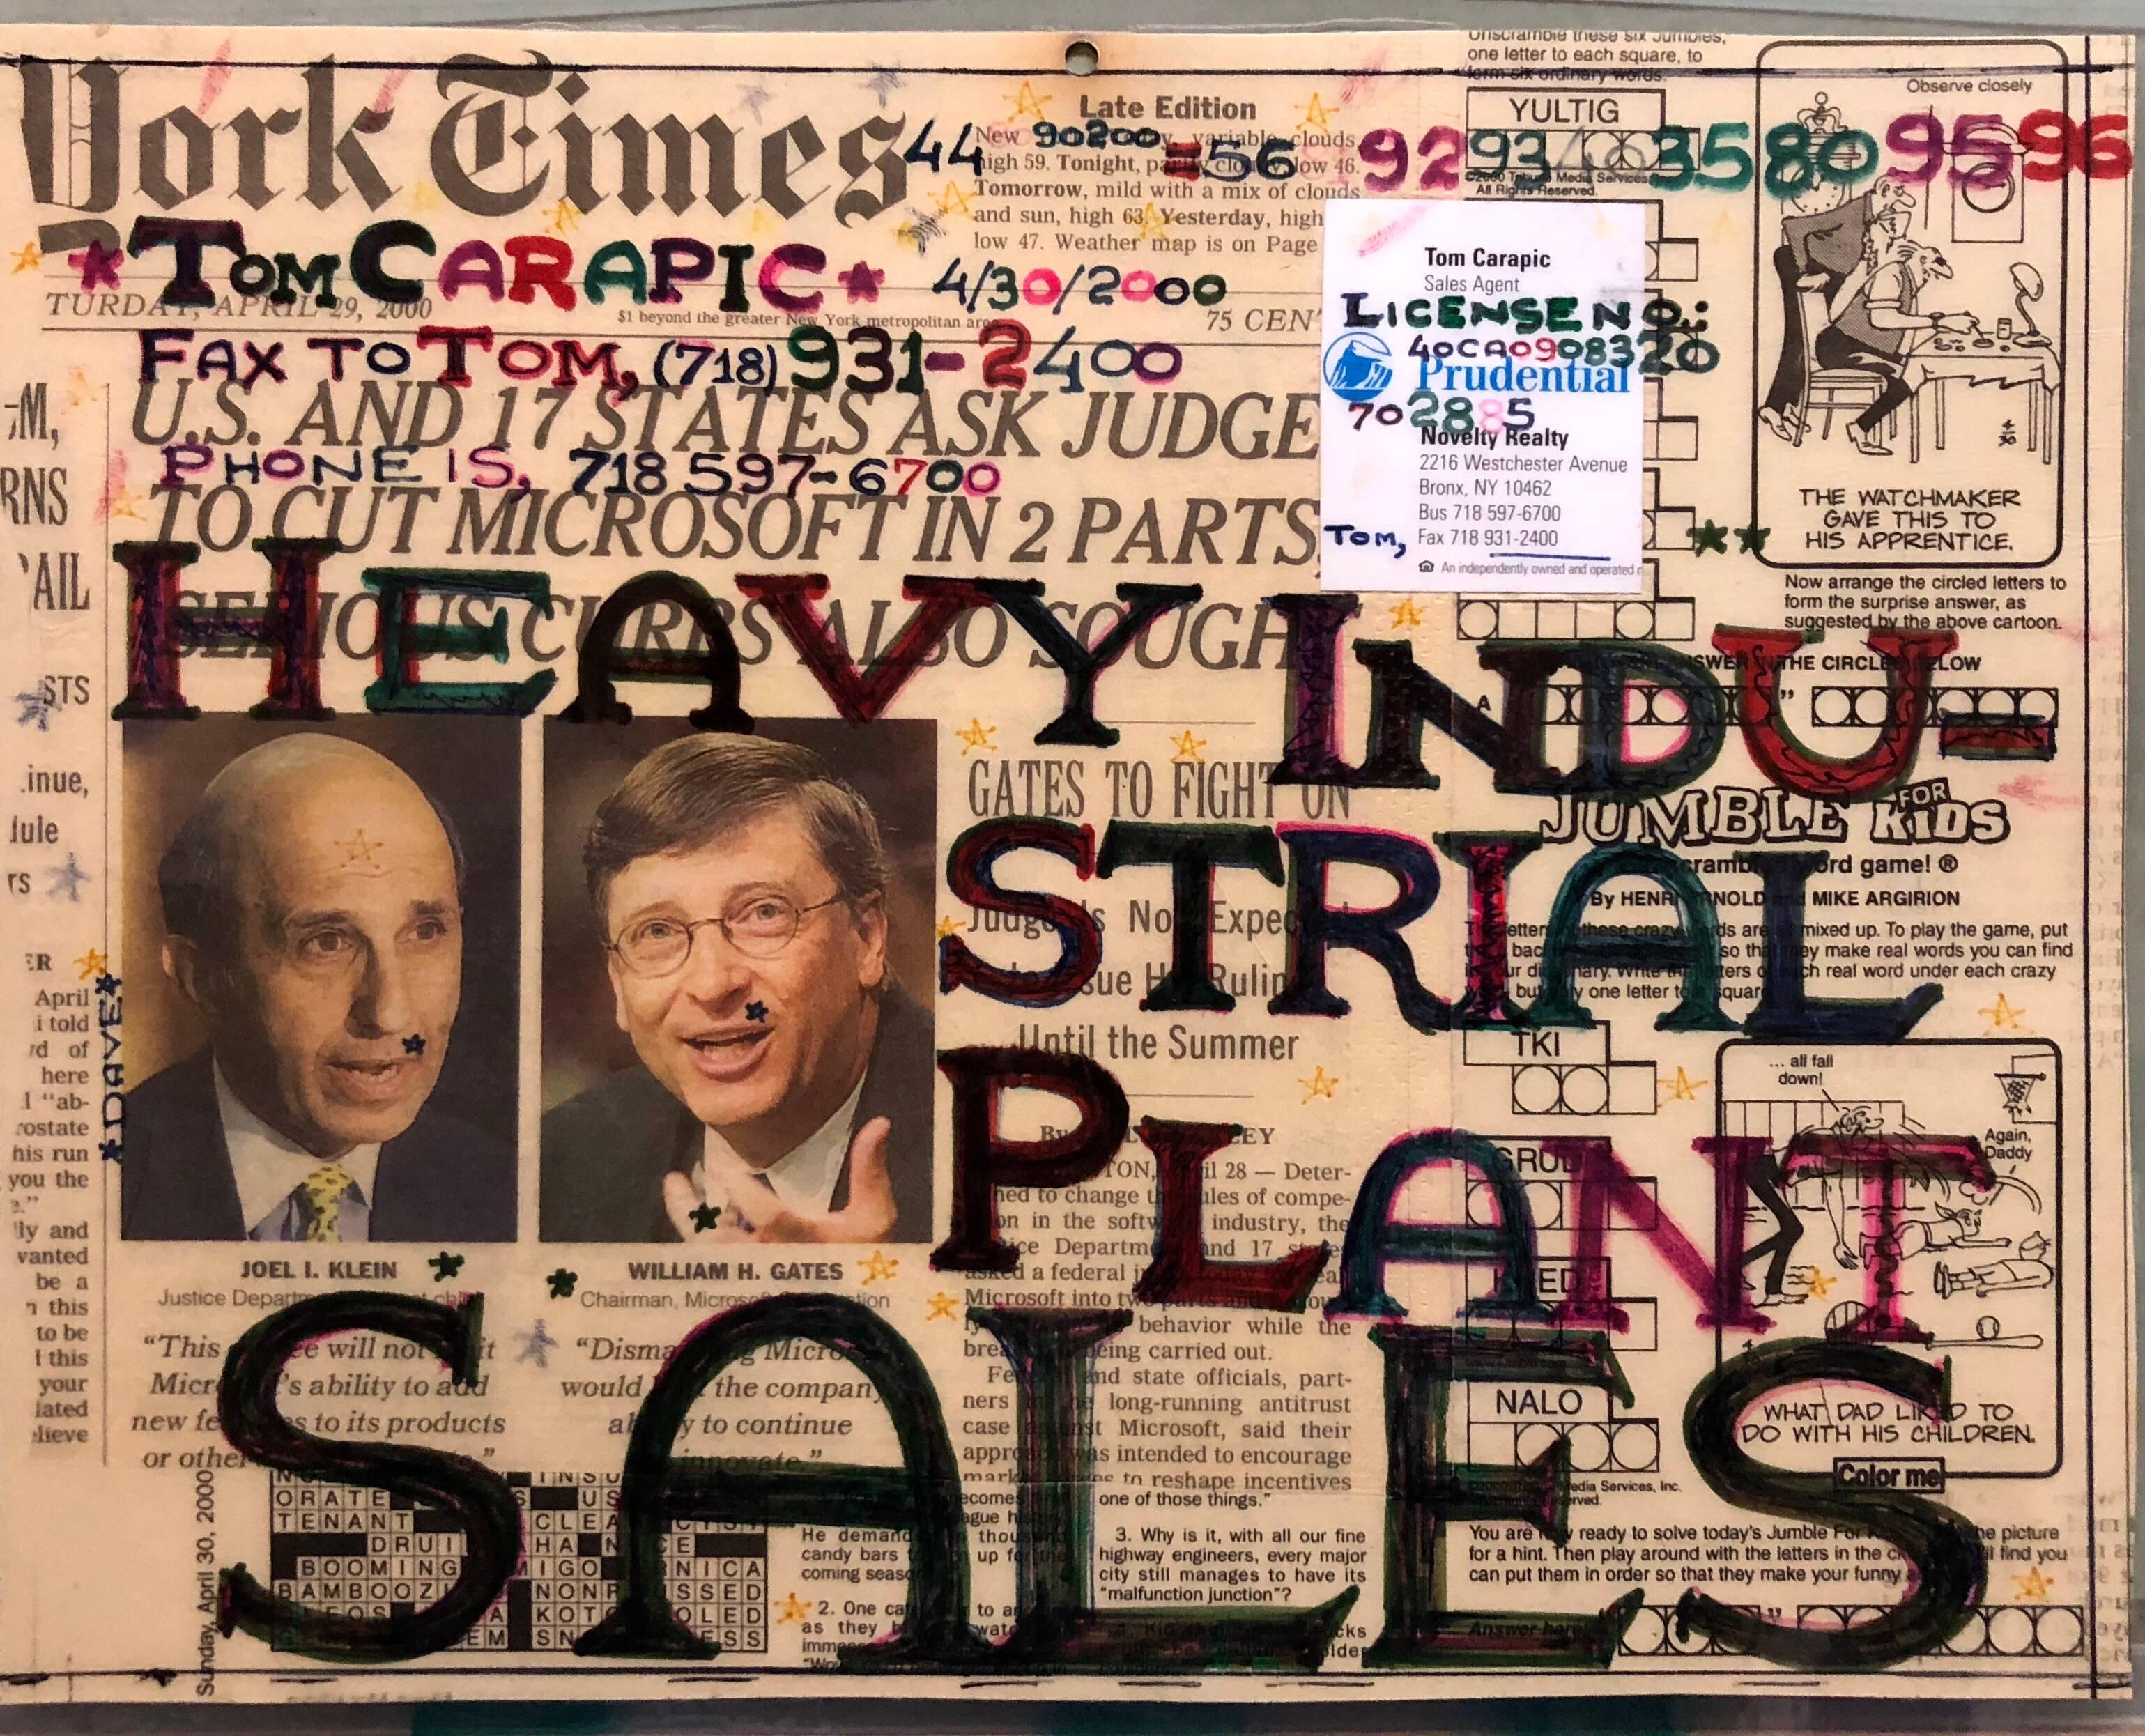 Mixed Media Outsider Visionary Art Newspaper Collage Bill Gates Laminated 2 side - Mixed Media Art by Tom Carapic